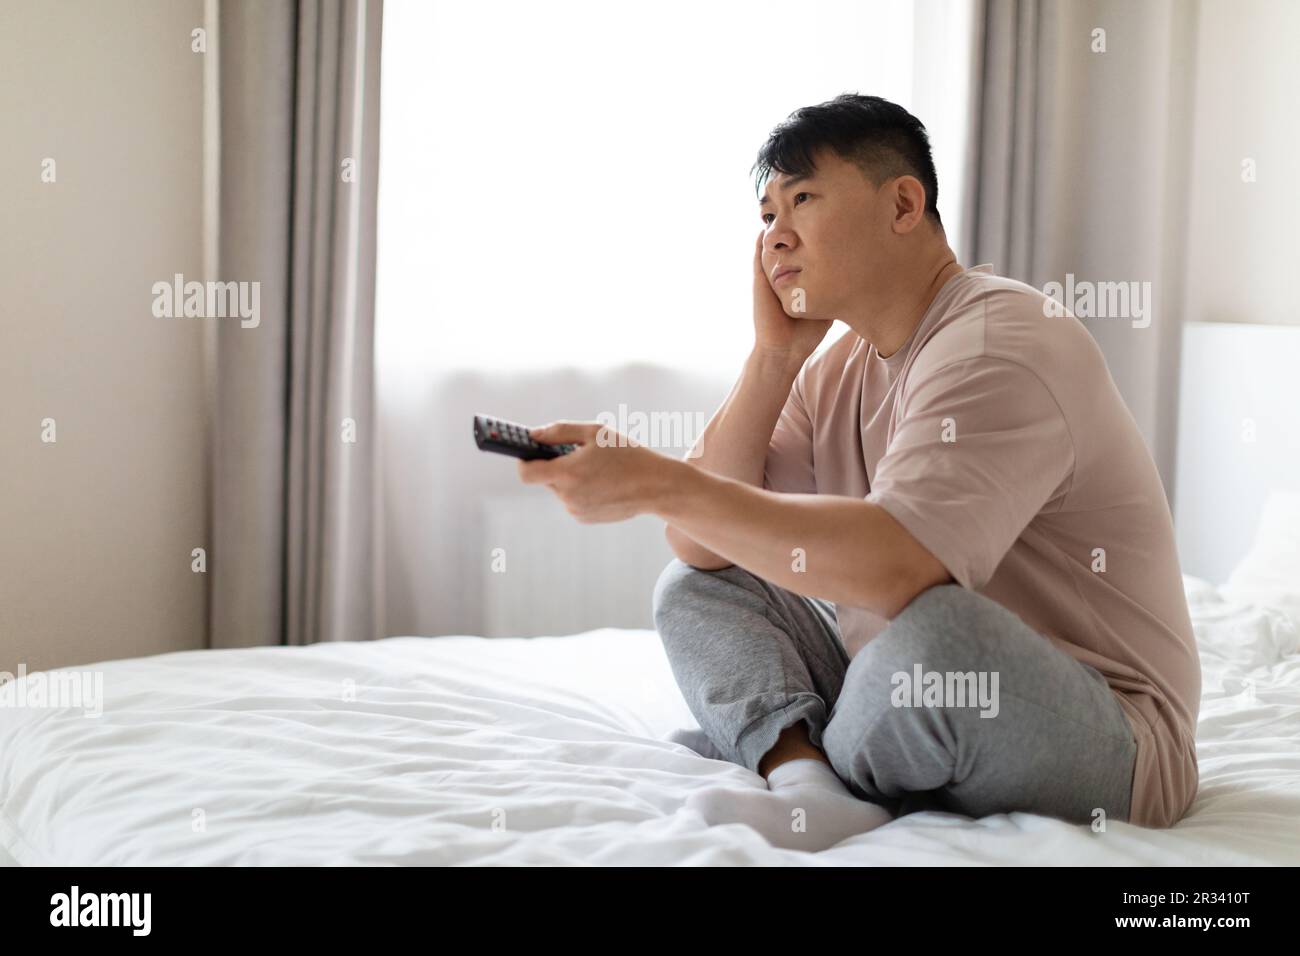 Unhappy middle aged asian man sitting on bed, watching TV Stock Photo